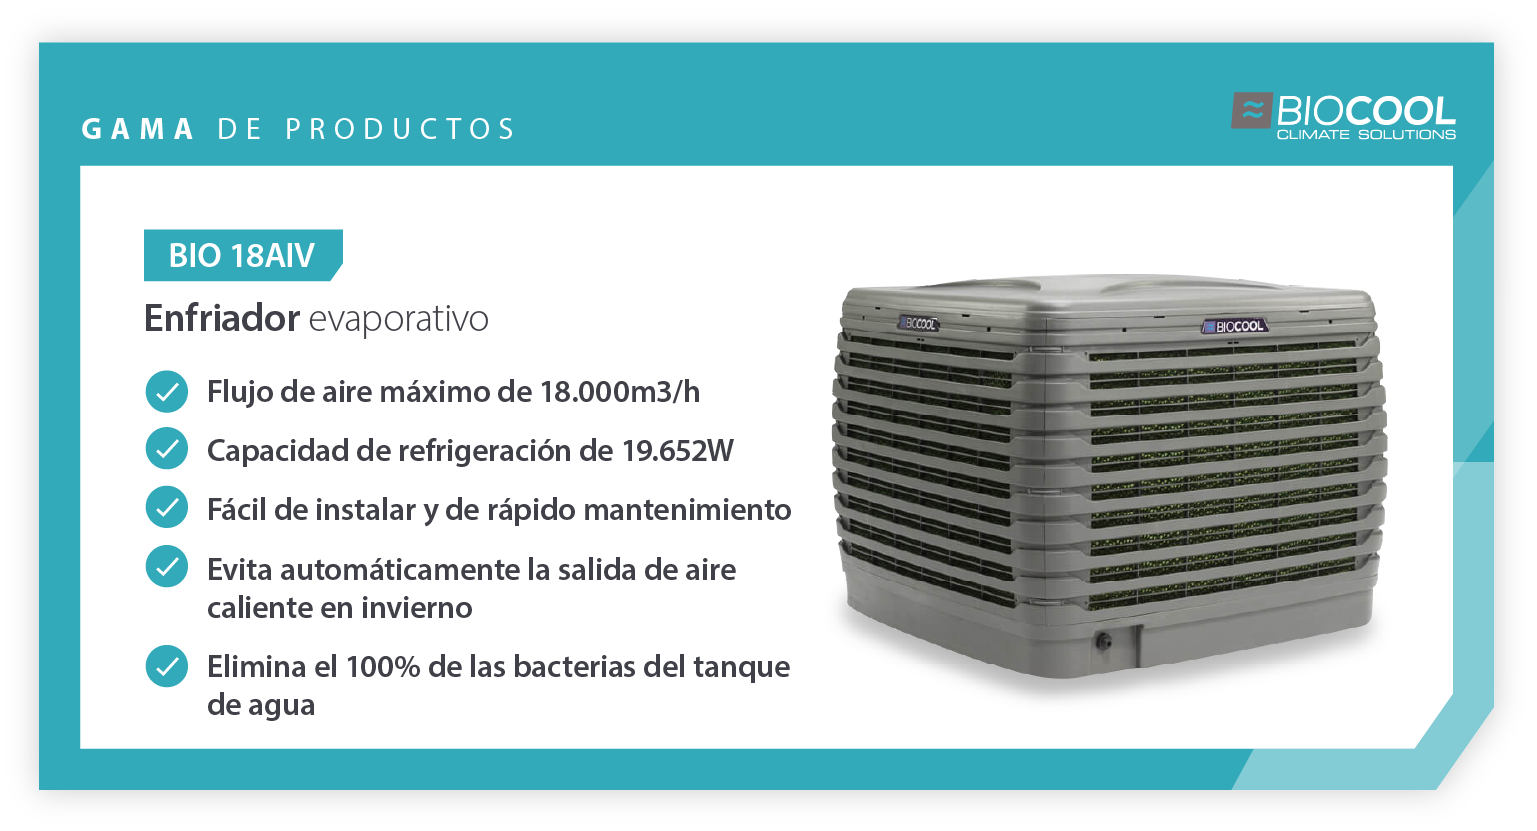 Product showcase of Biocool BIO 18AIV evaporative cooler for automotive industry usage